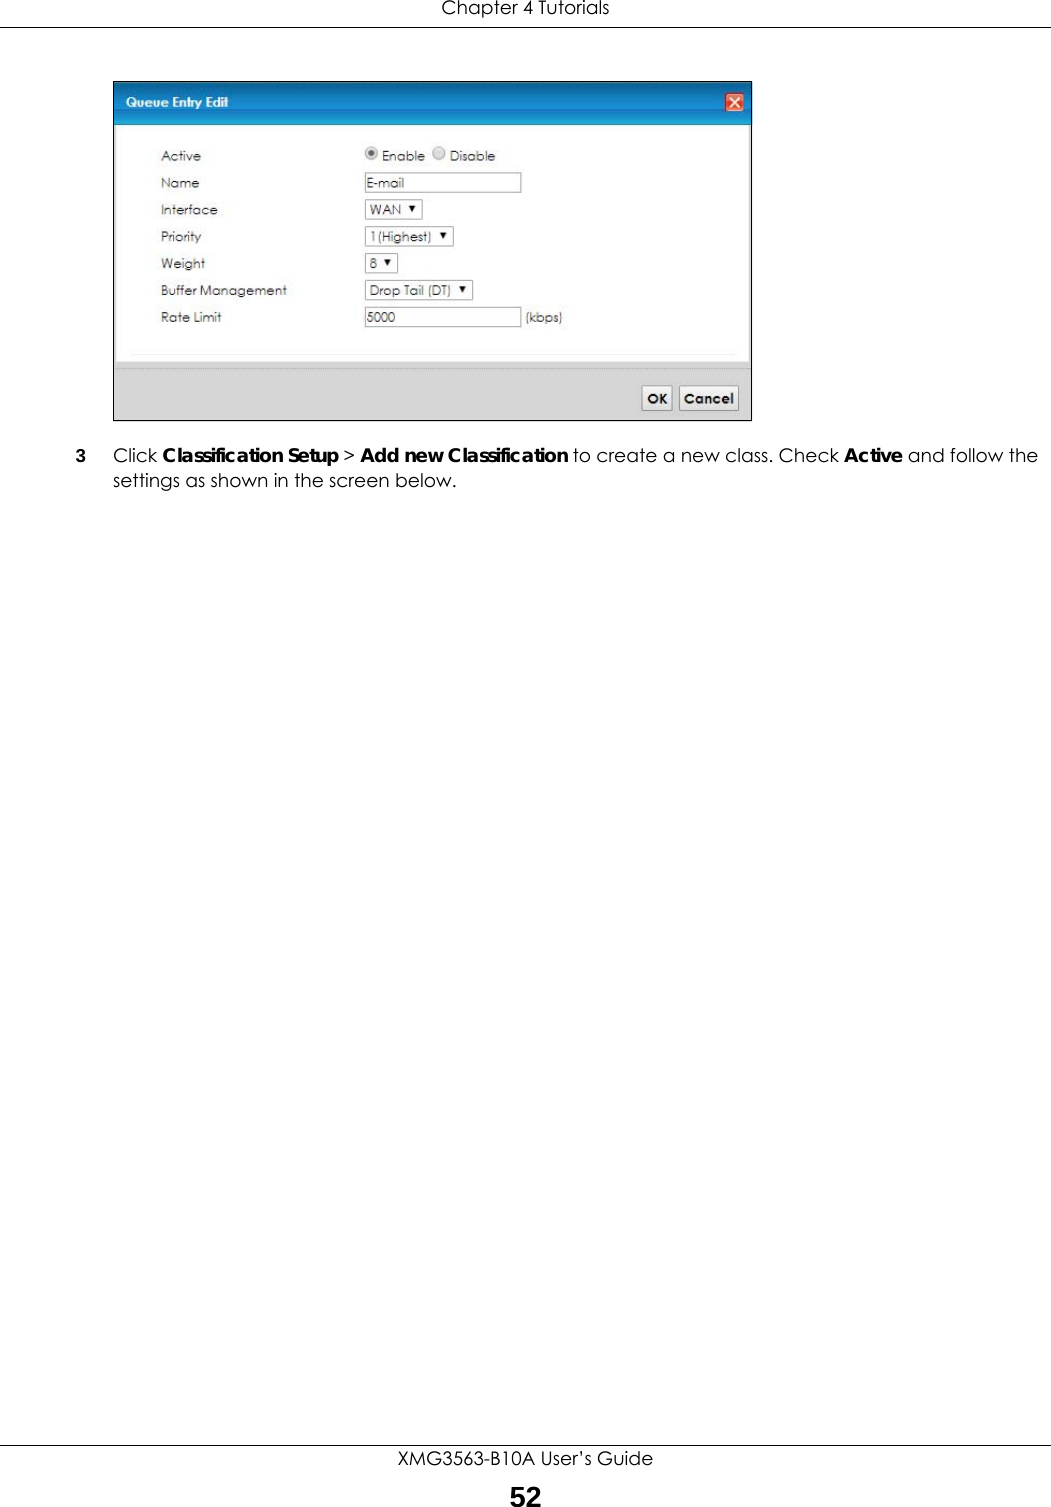 Chapter 4 TutorialsXMG3563-B10A User’s Guide52Tutorial: Advanced &gt; QoS &gt; Queue Setup3Click Classification Setup &gt; Add new Classification to create a new class. Check Active and follow the settings as shown in the screen below.